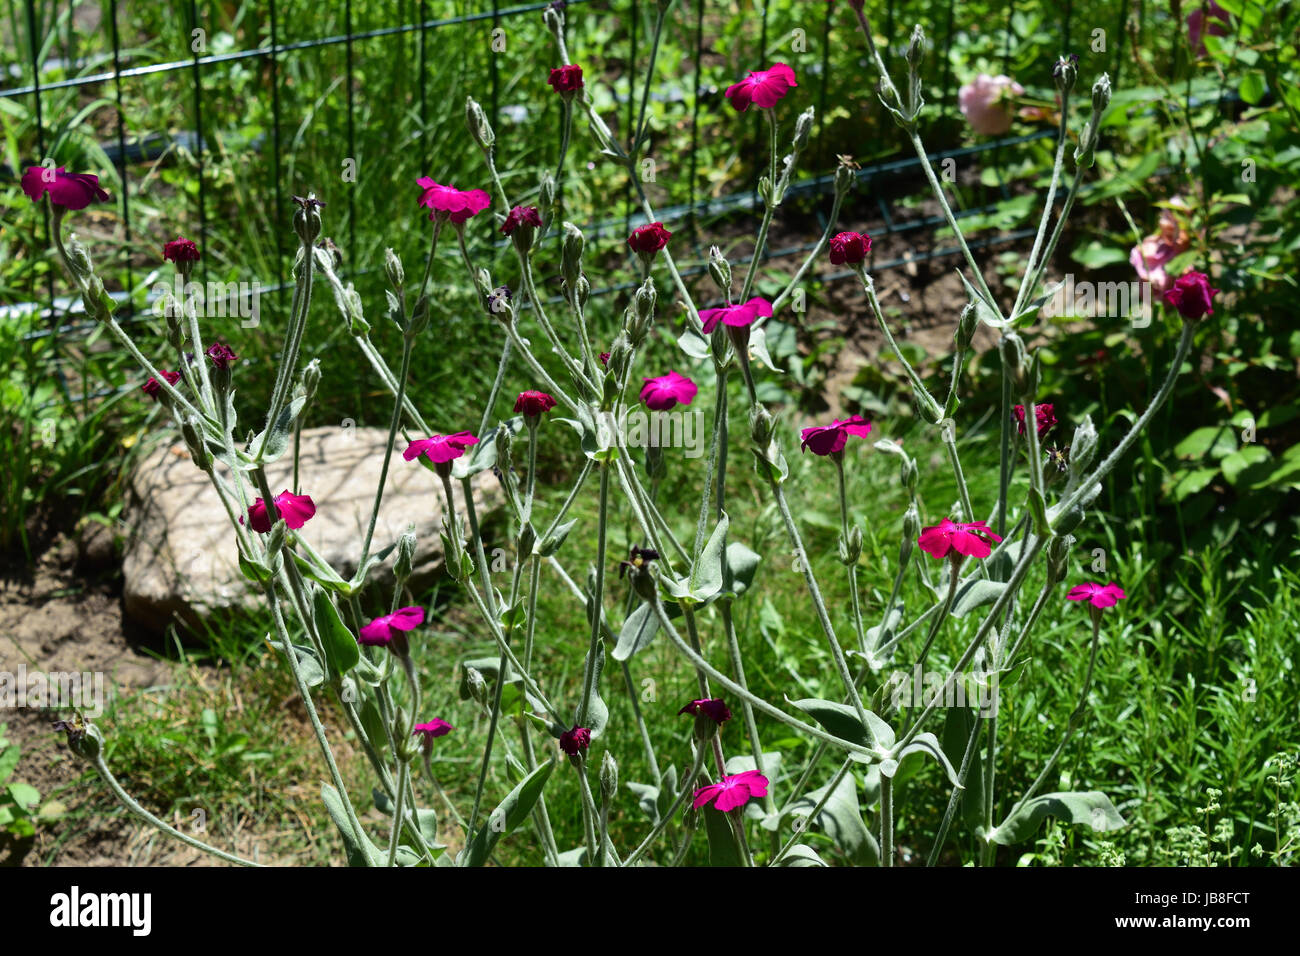 Silene coronaria is a species of flowering plant  native to Asia and Europe. Common names include rose campion, dusty miller, mullein-pink. Stock Photo